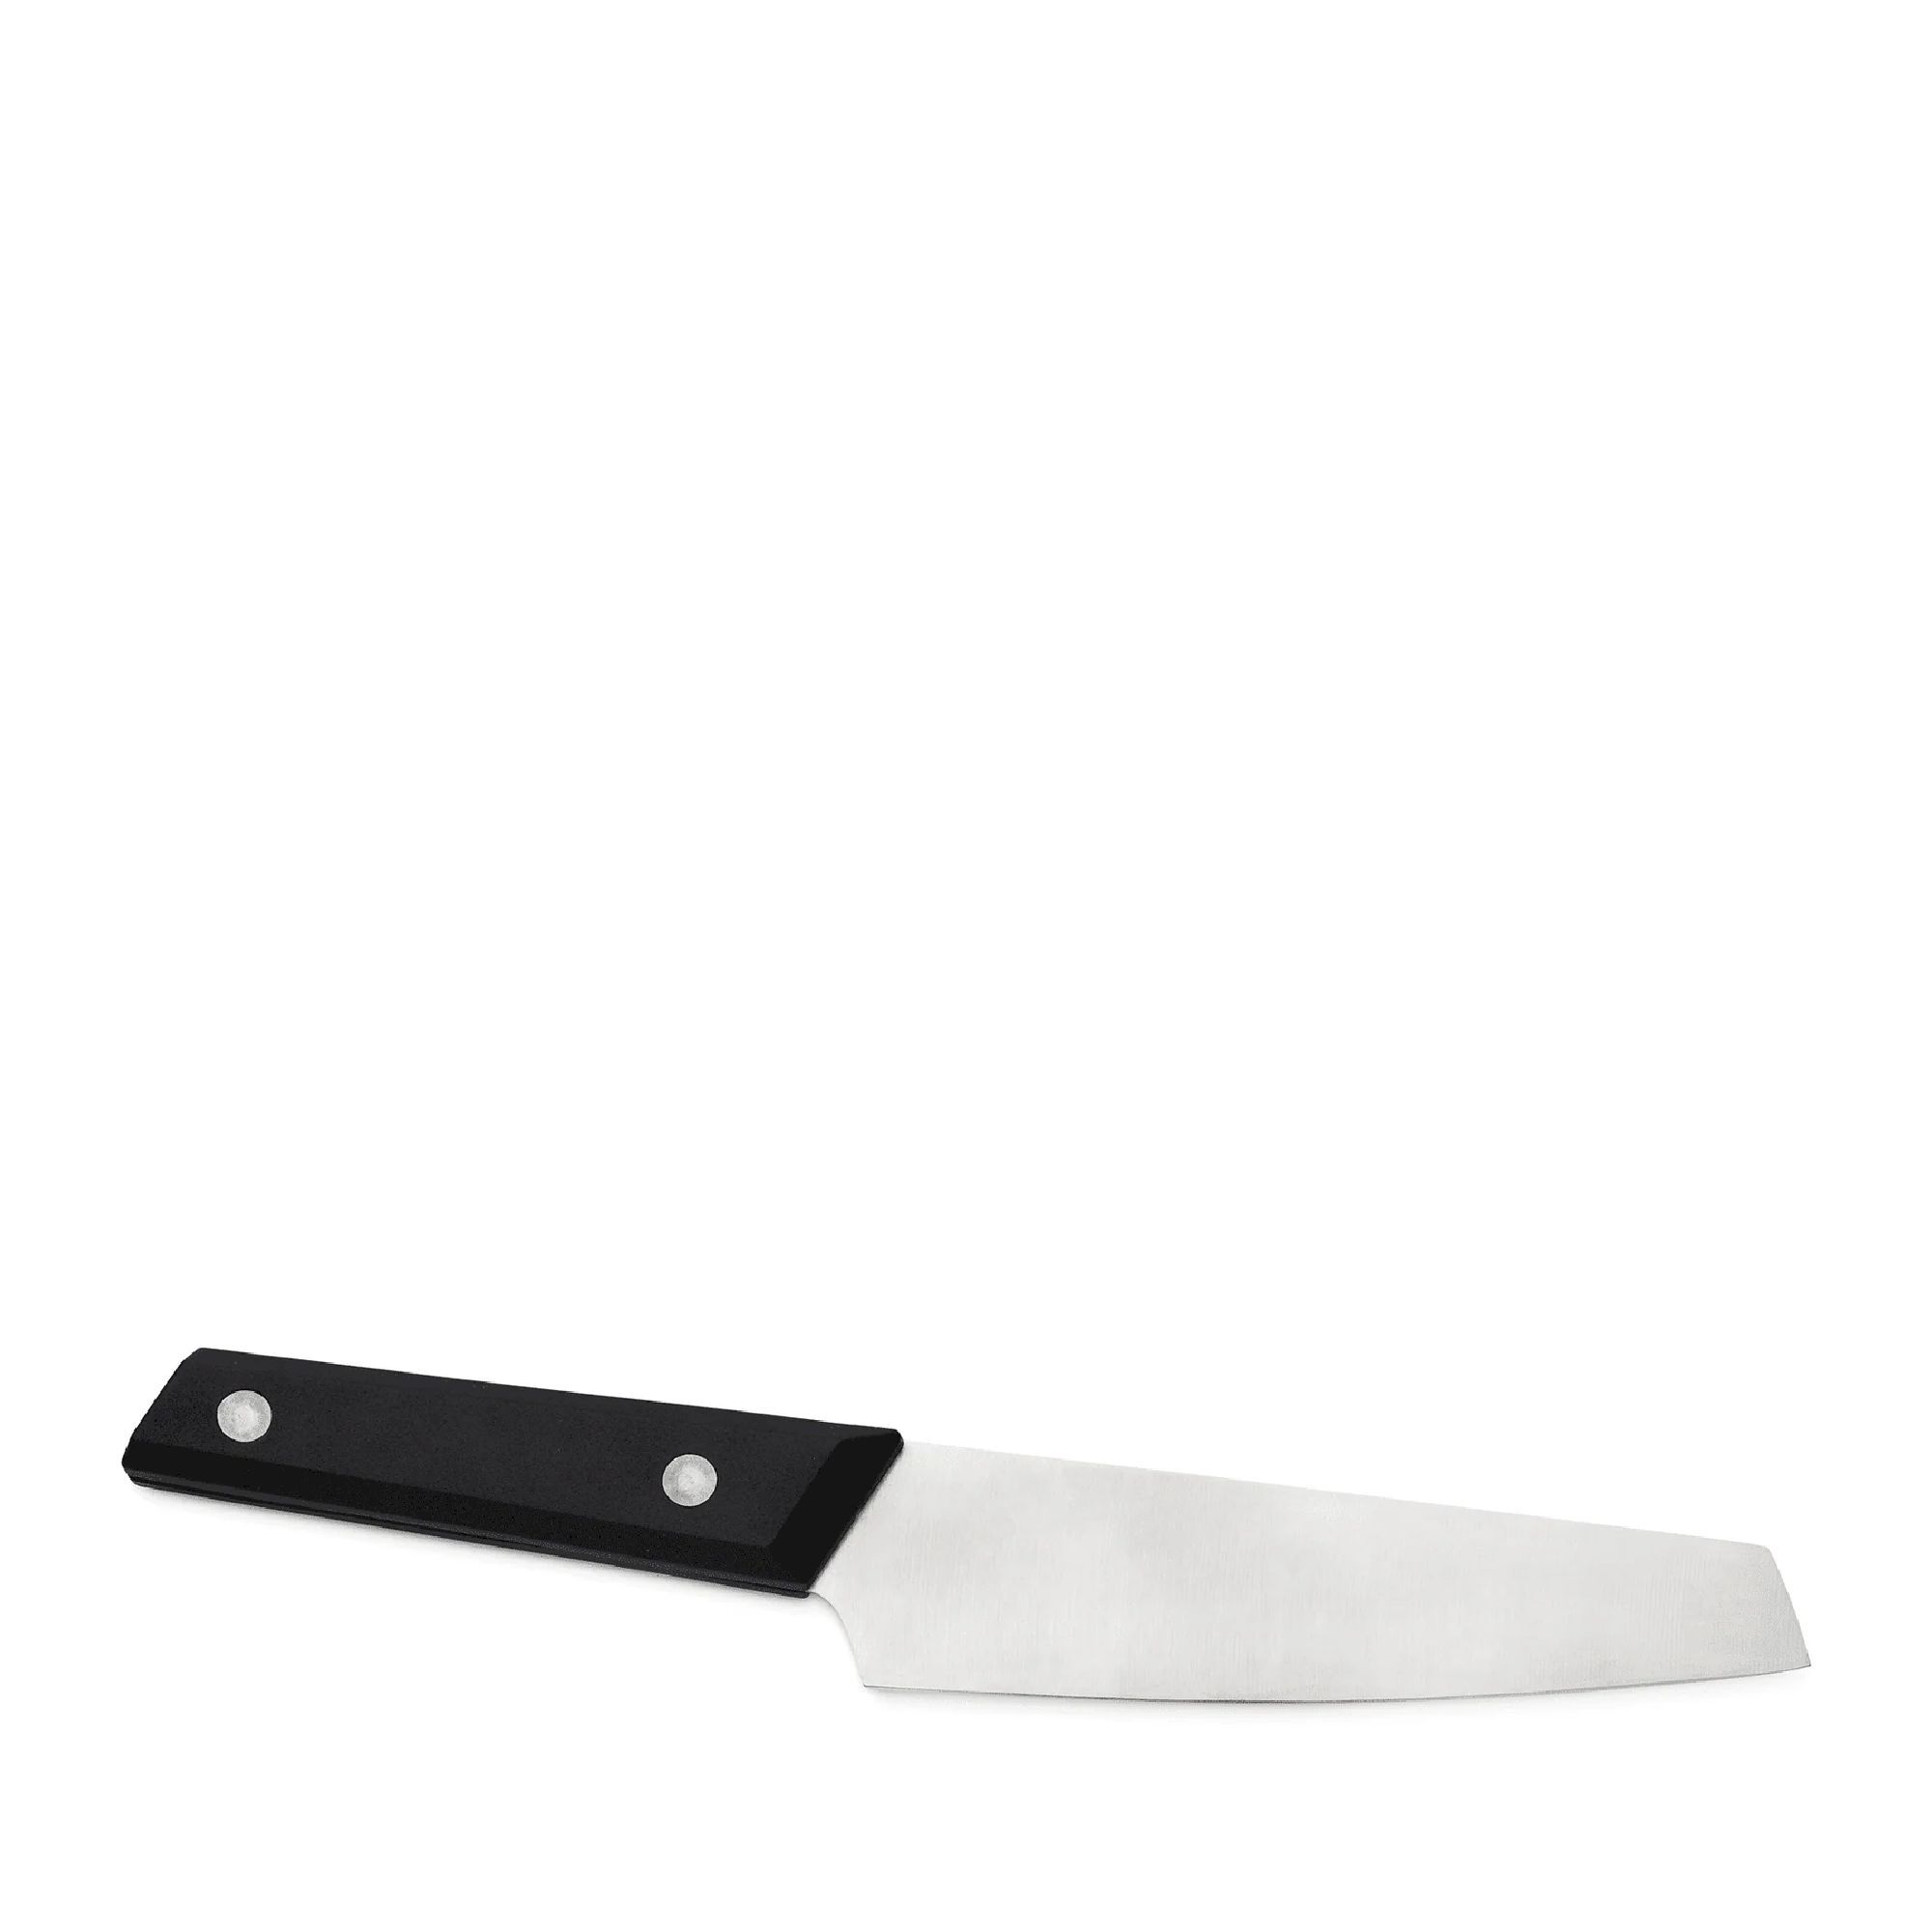 Primus FieldChef Knife - Couteau | Hardloop